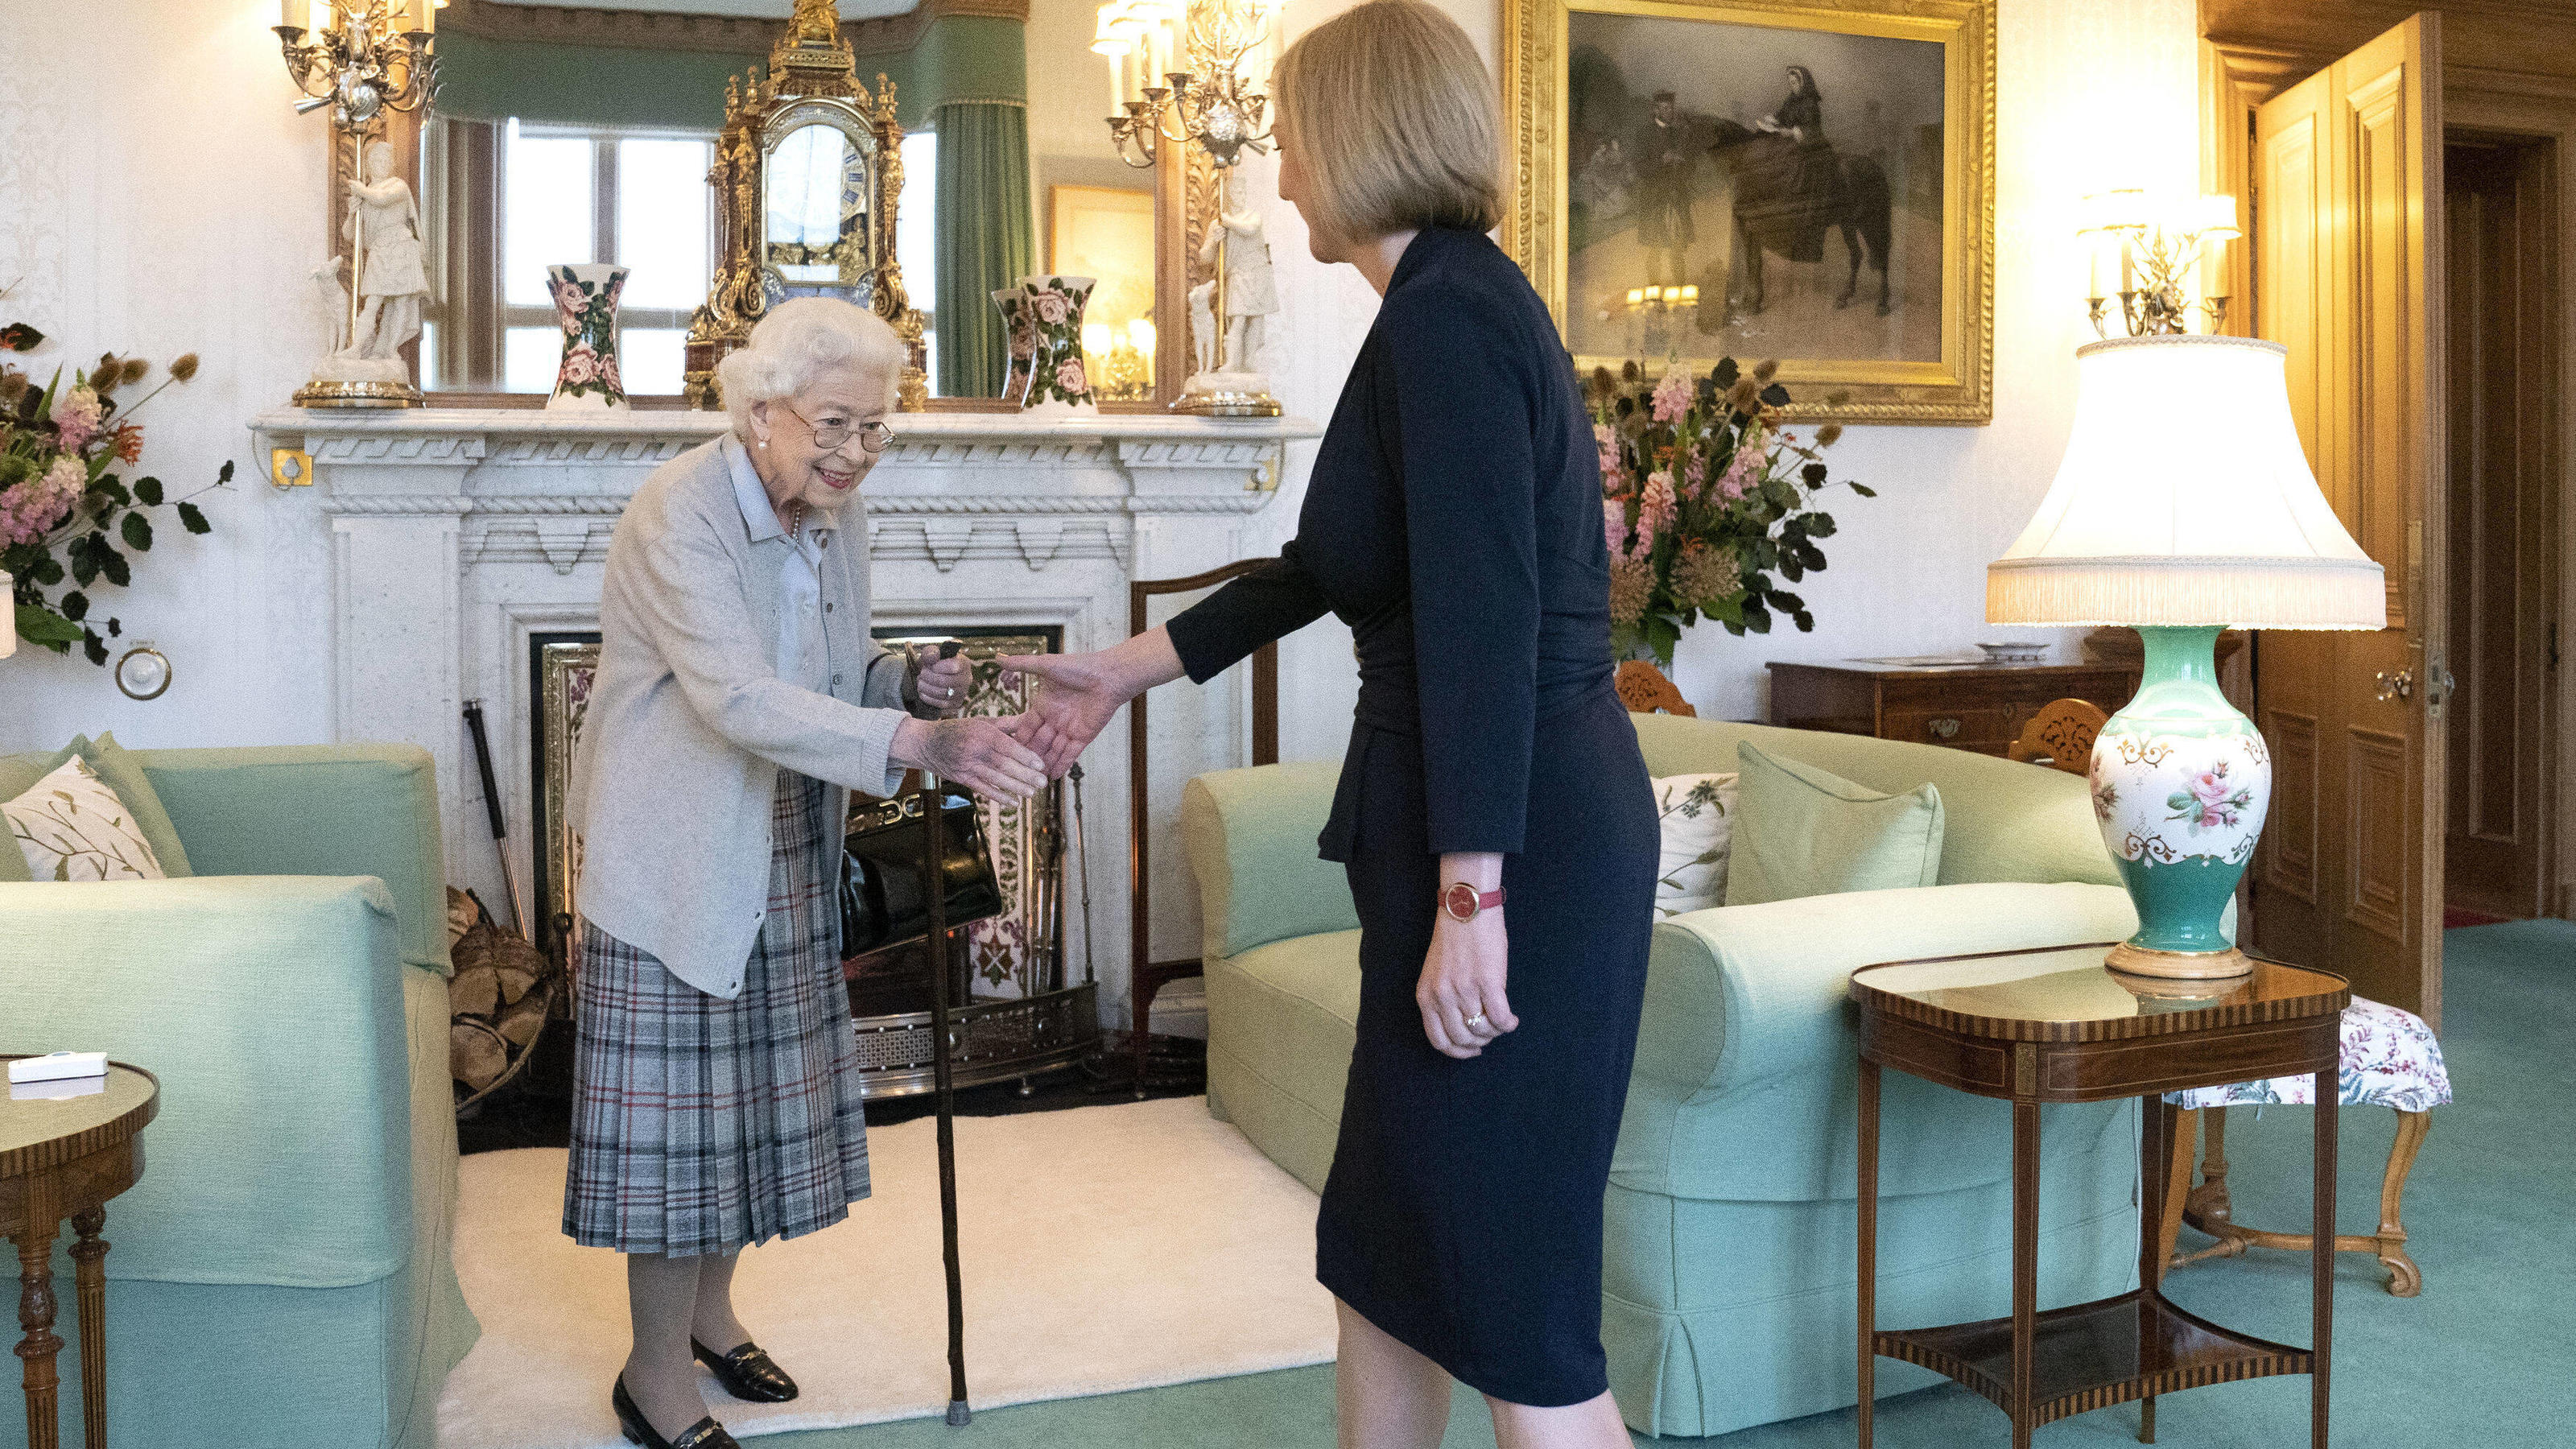  Entertainment Bilder des Tages . 06/09/2022. Balmoral, United Kingdom. Queen Elizabeth II welcomes Liz Truss, during an audience at Balmoral, Scotland, where she invited the newly elected leader of the Conservative party to become the new Prime Mini